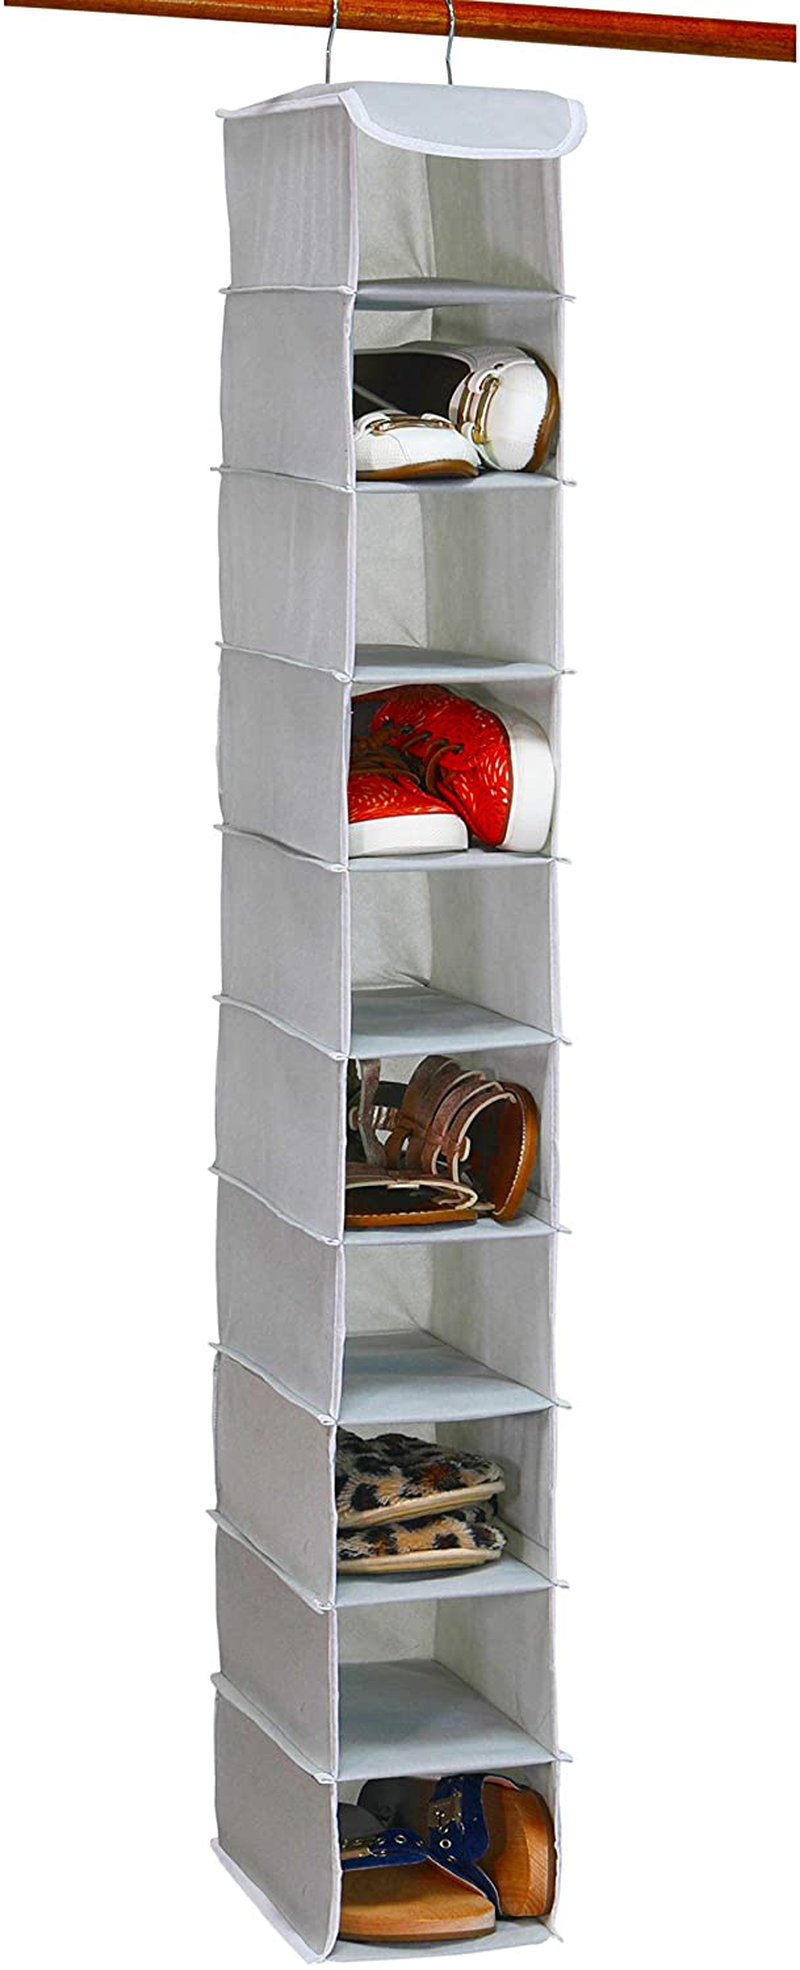 Simple Houseware 10 Shelves Hanging Shoes Organizer Holder for Closet, Brown